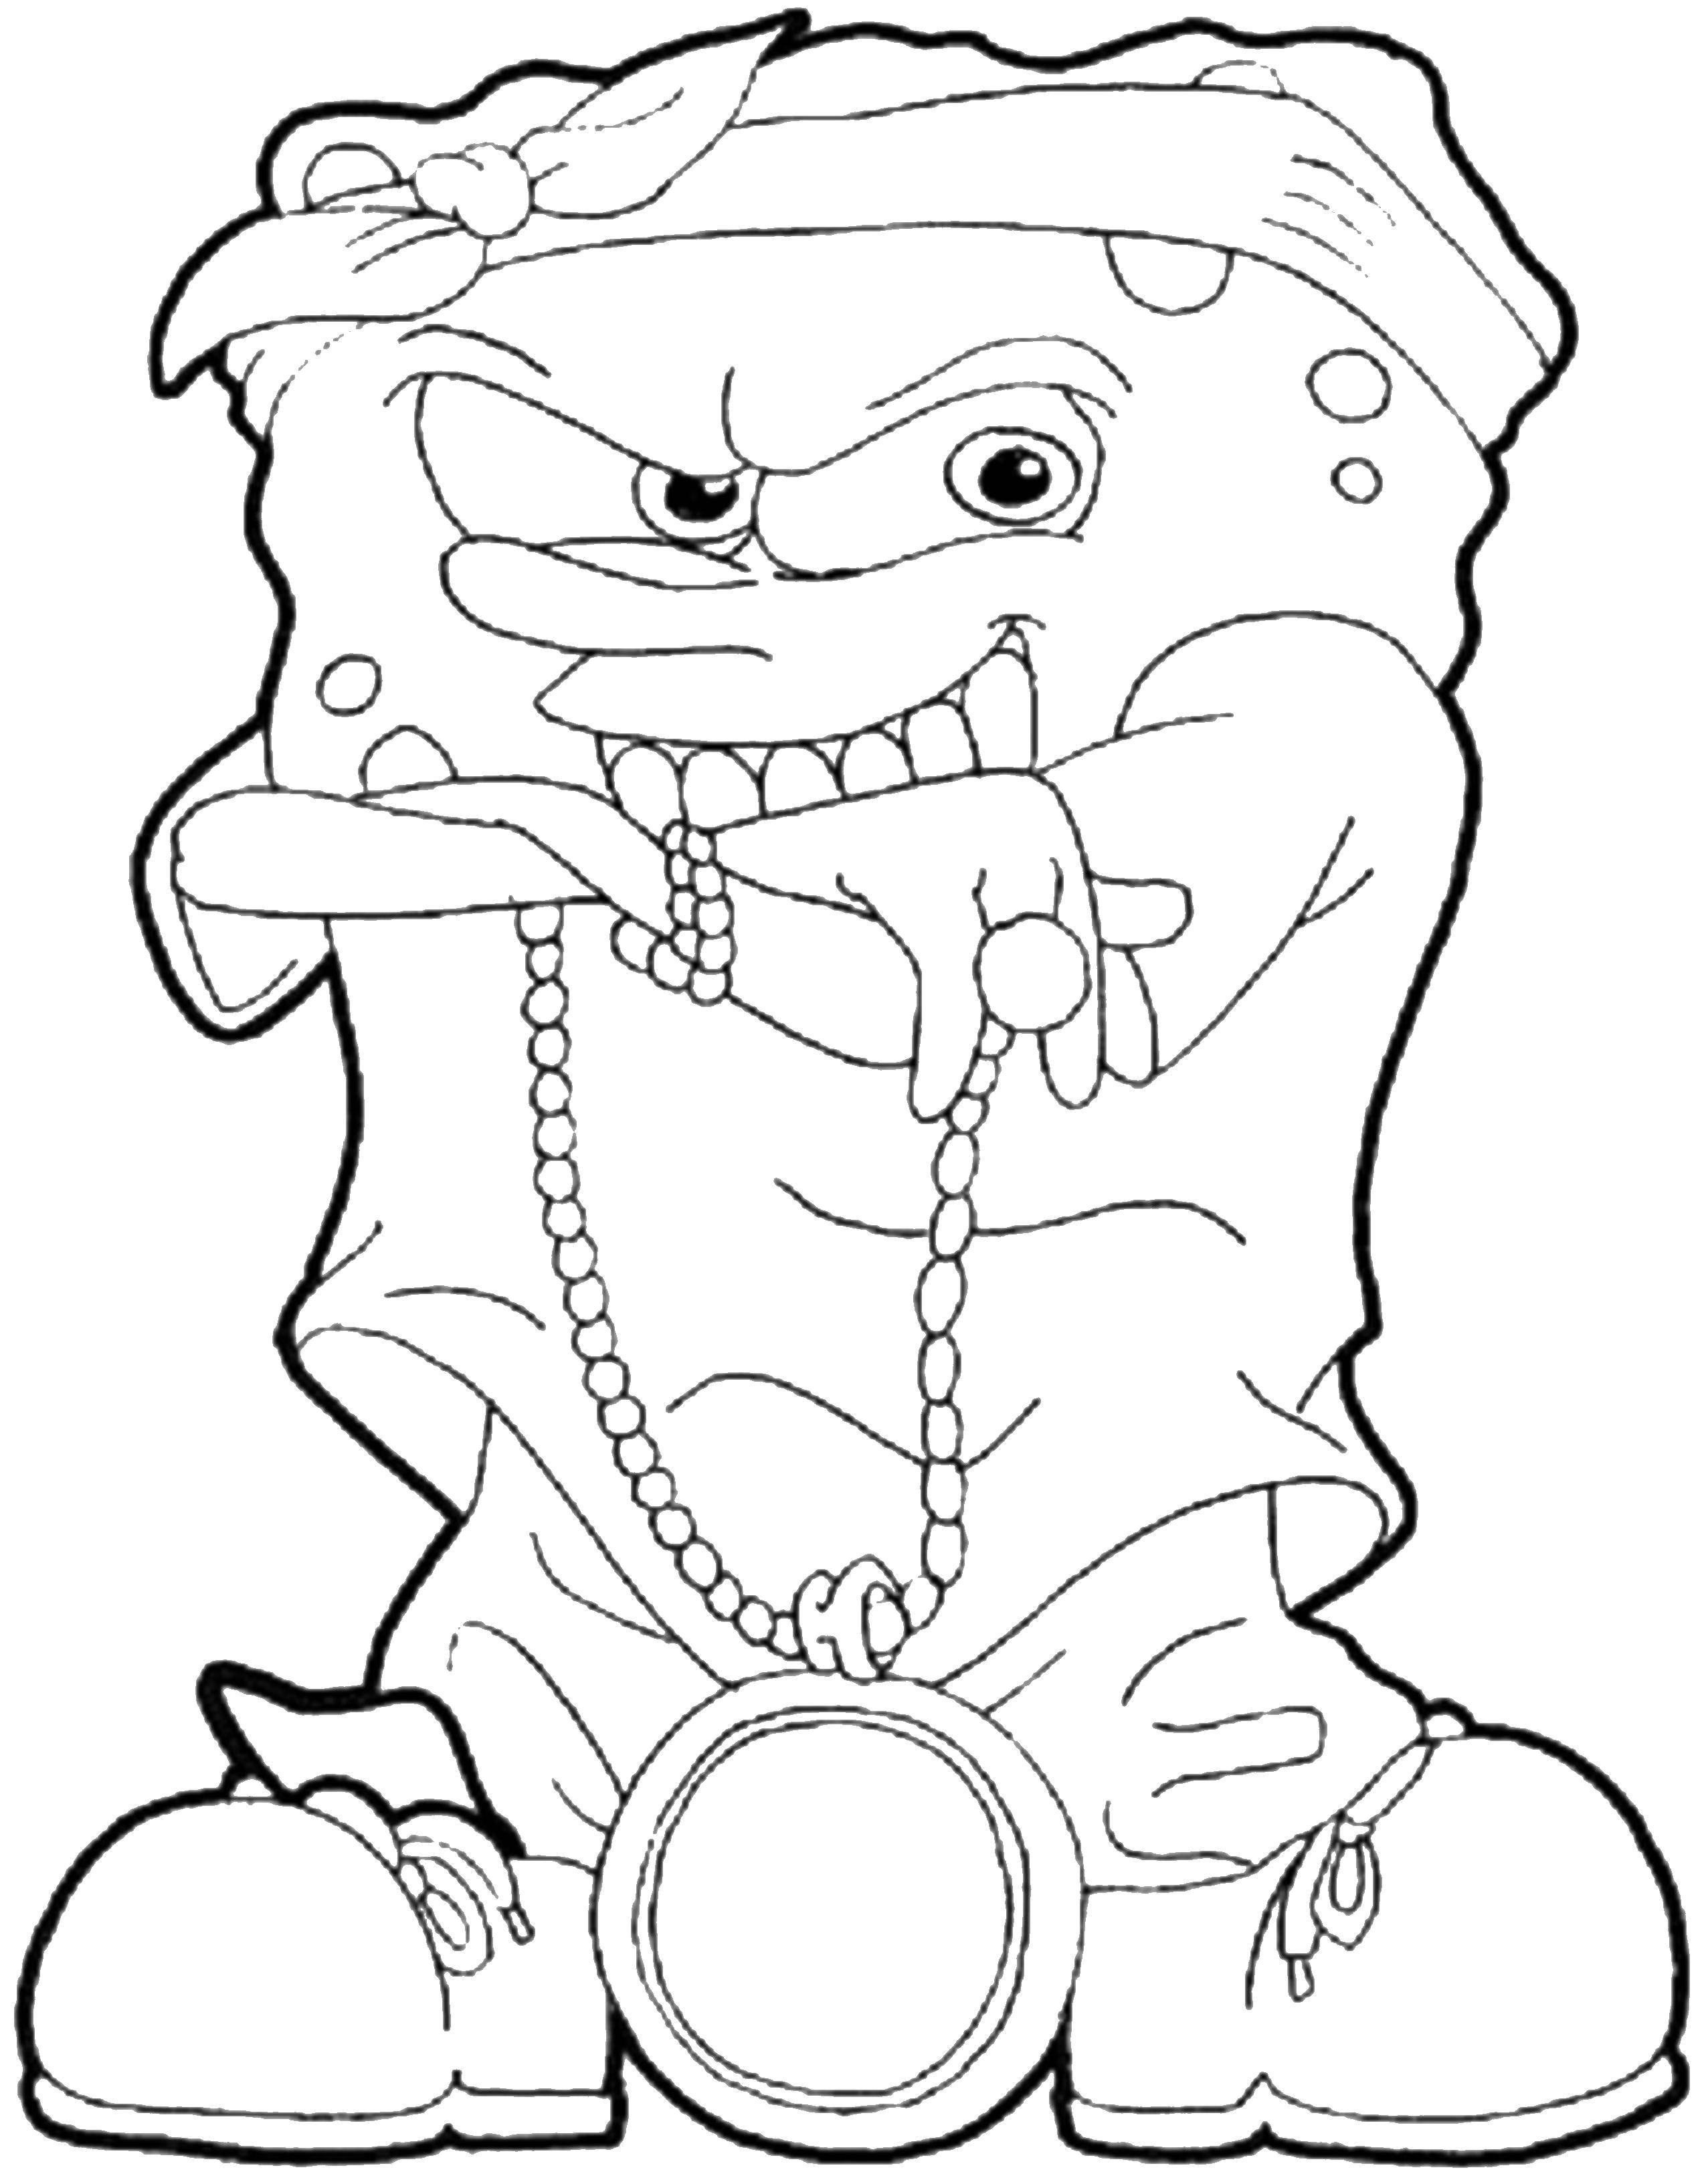 Spongebob Coloring Pages Printable for Free Download